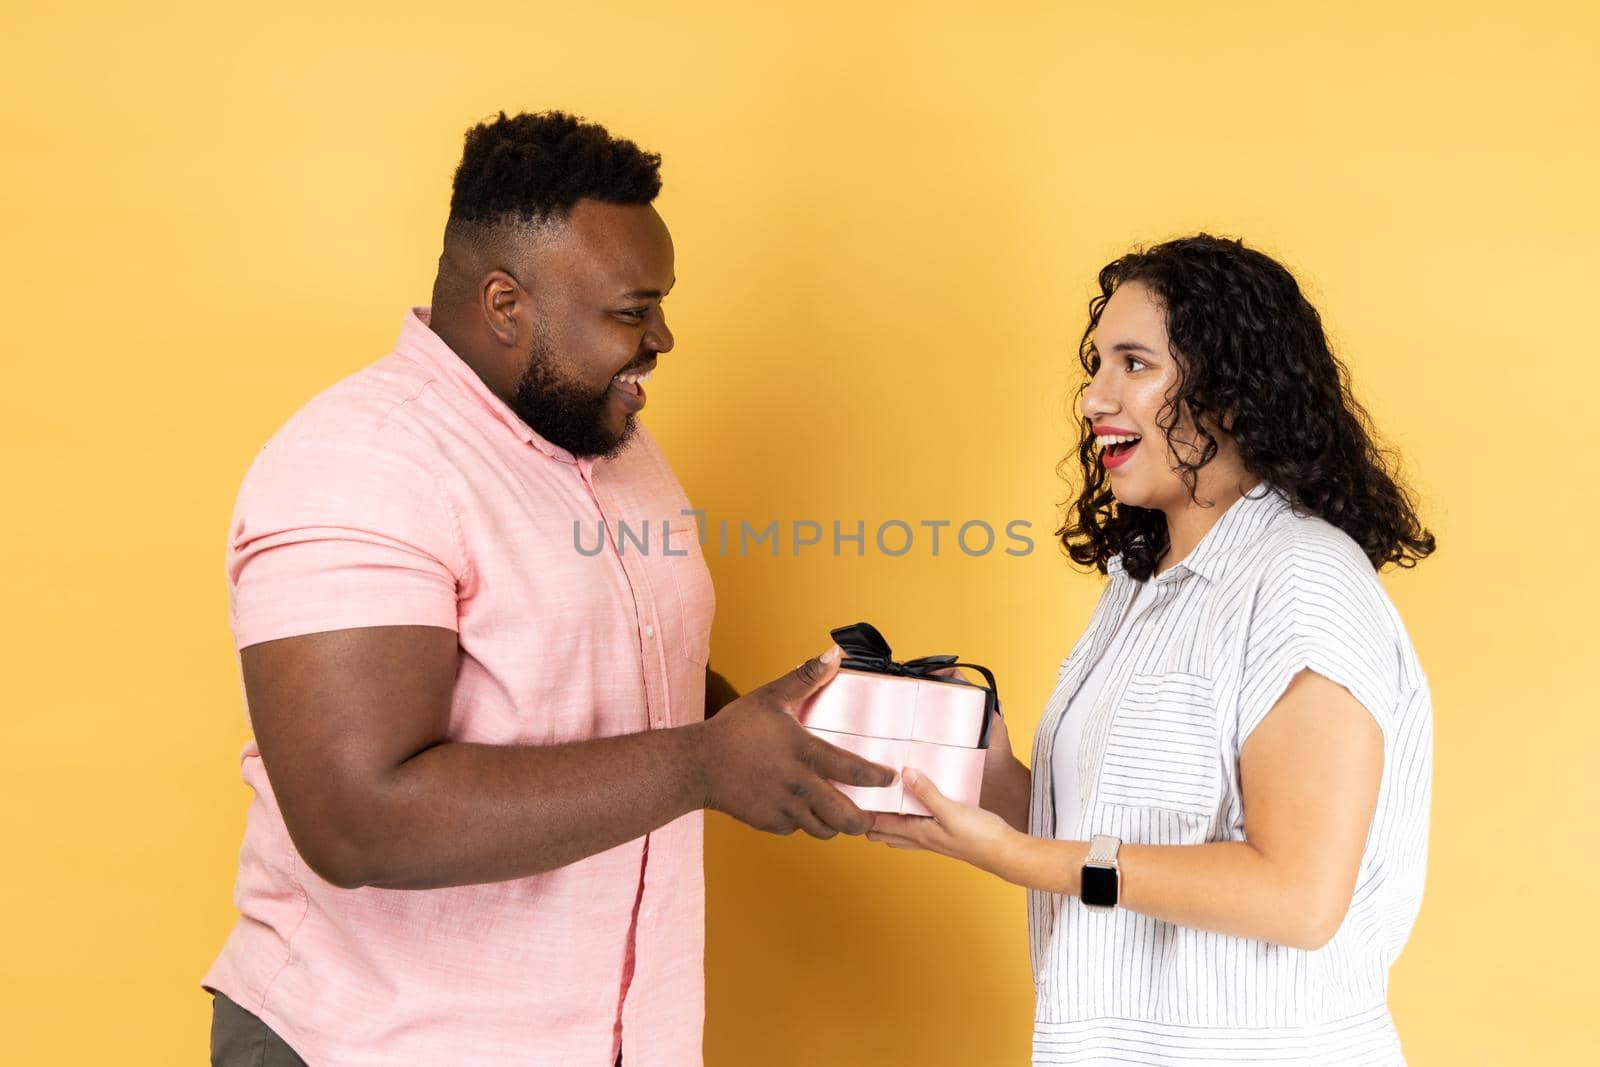 Portrait of couple in casual clothing standing together, celebrating anniversary, giving box with present to charming woman, looking at each other. Indoor studio shot isolated on yellow background.